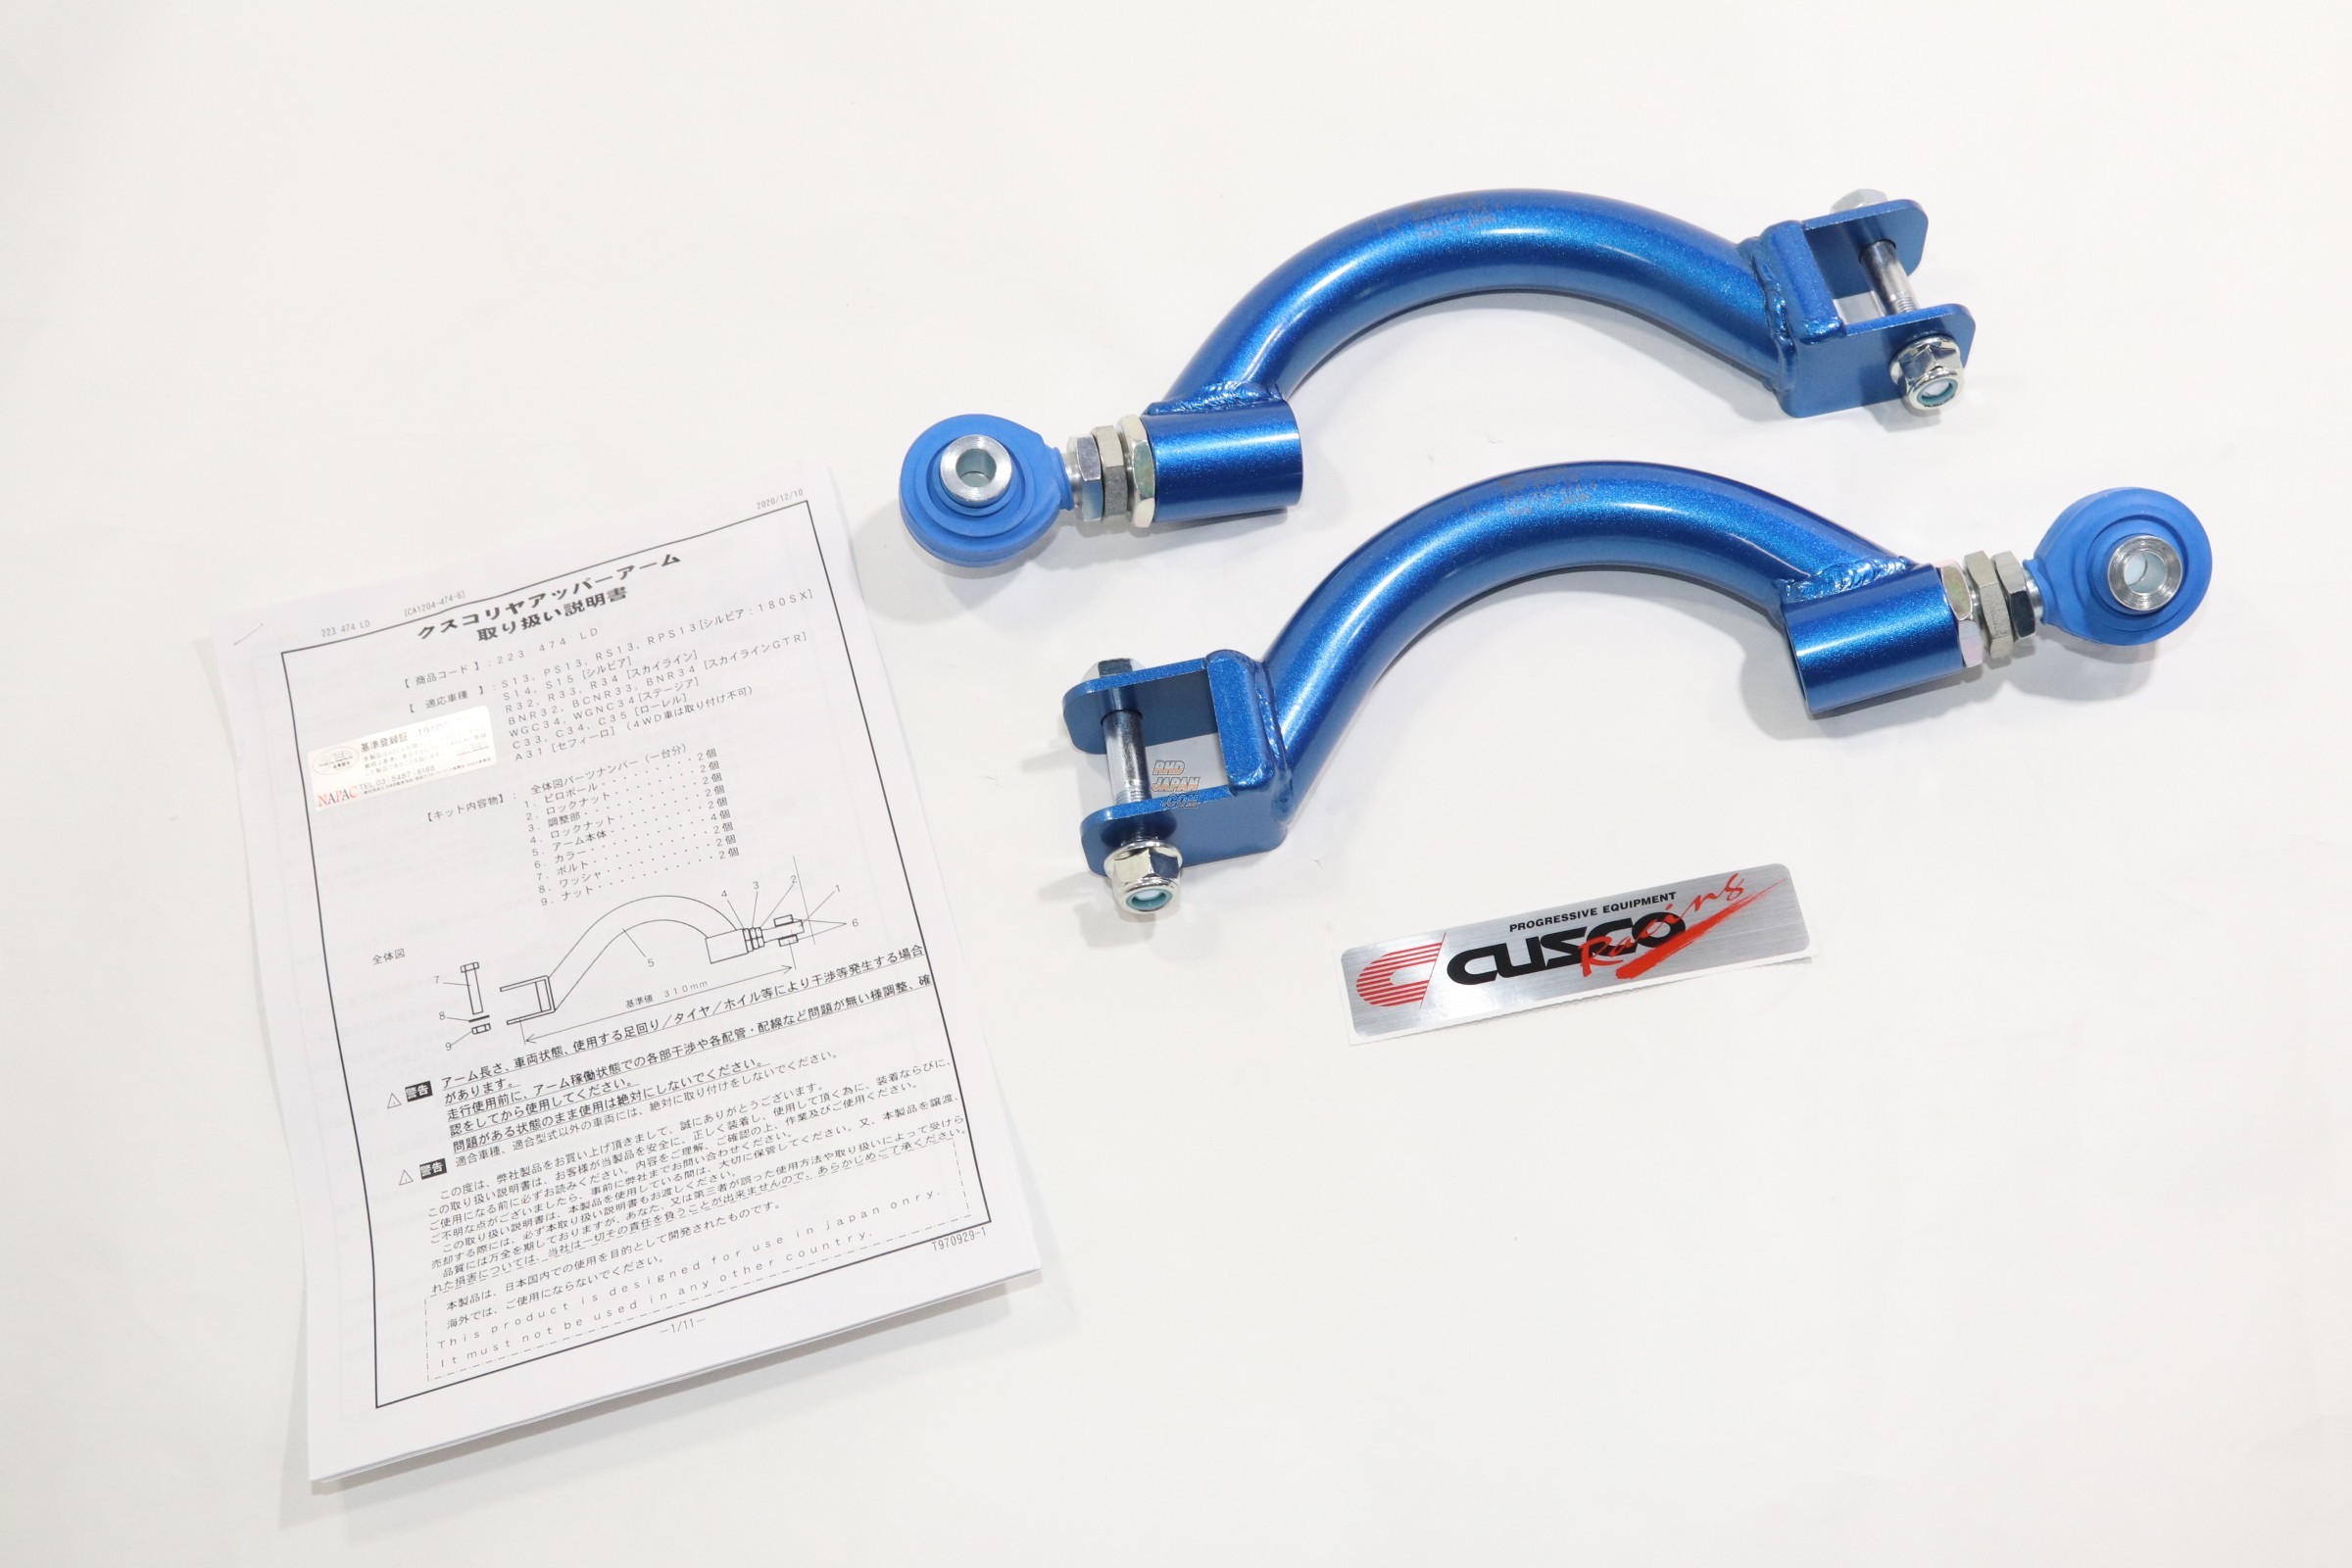 SALE／65%OFF】 CUSCO クスコ ドリフトアングルキット リヤ用 競技専用部品 シルビア S13 S14 S15 m2-co.jp